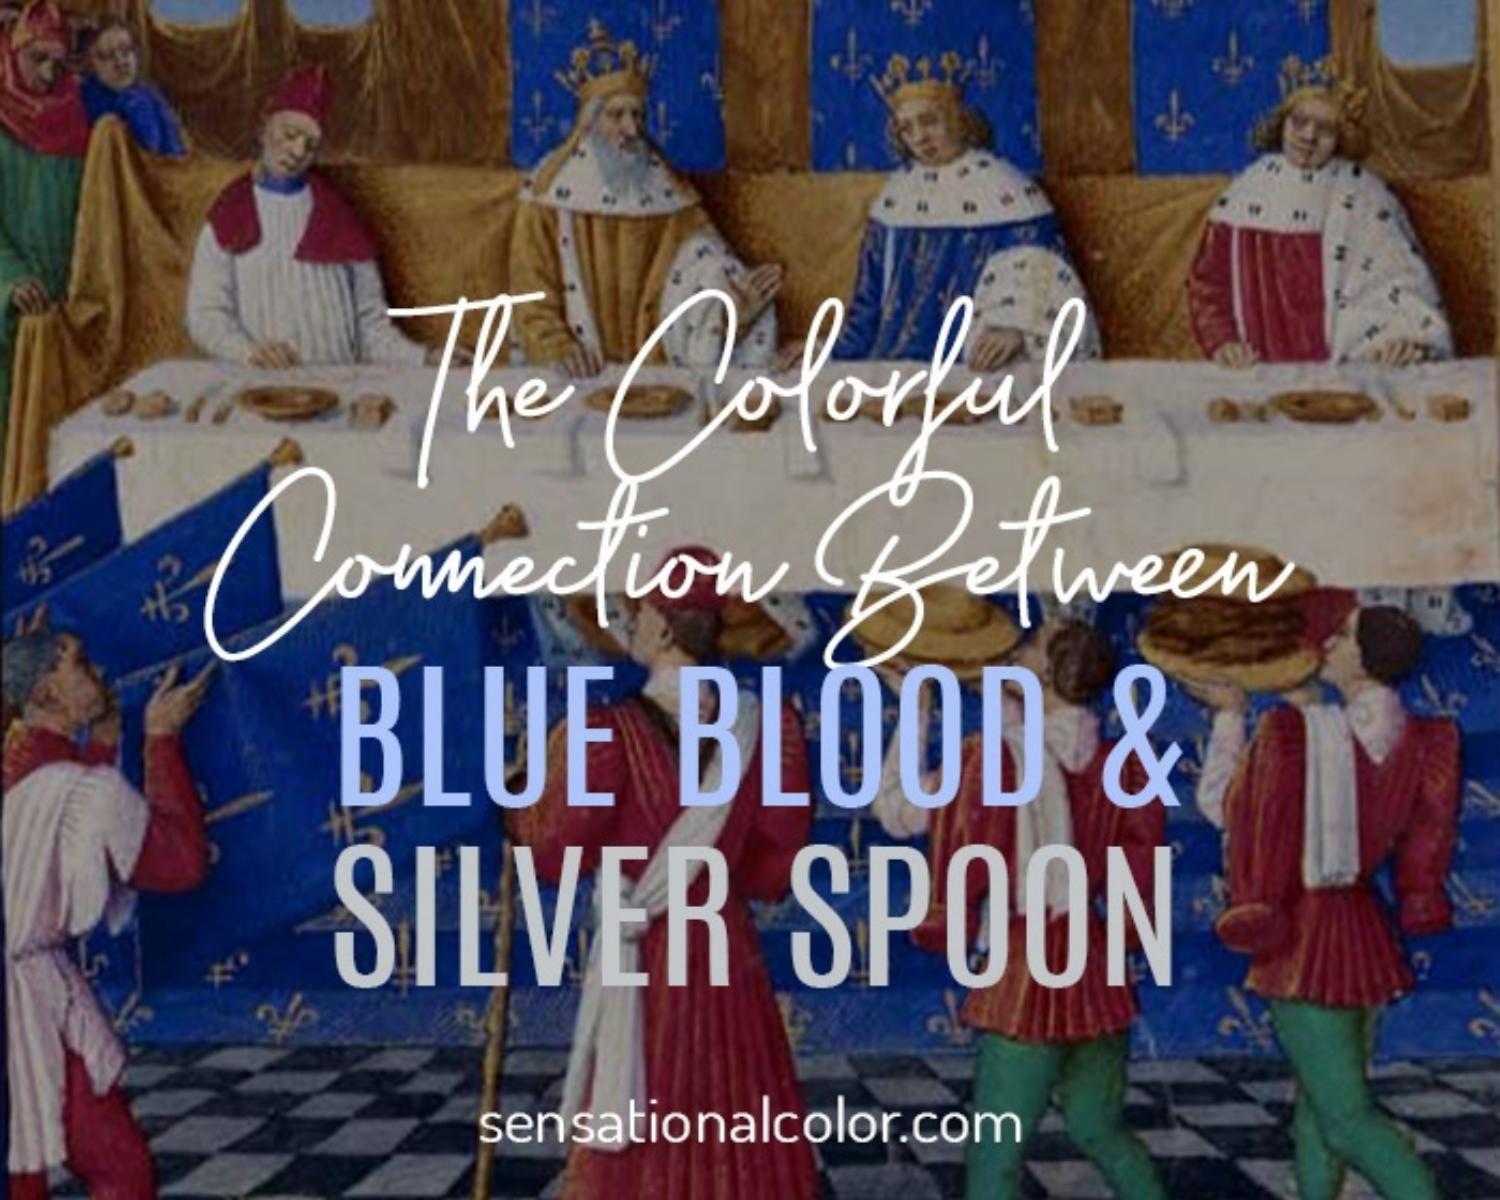 Of blue bloods and silver spoons